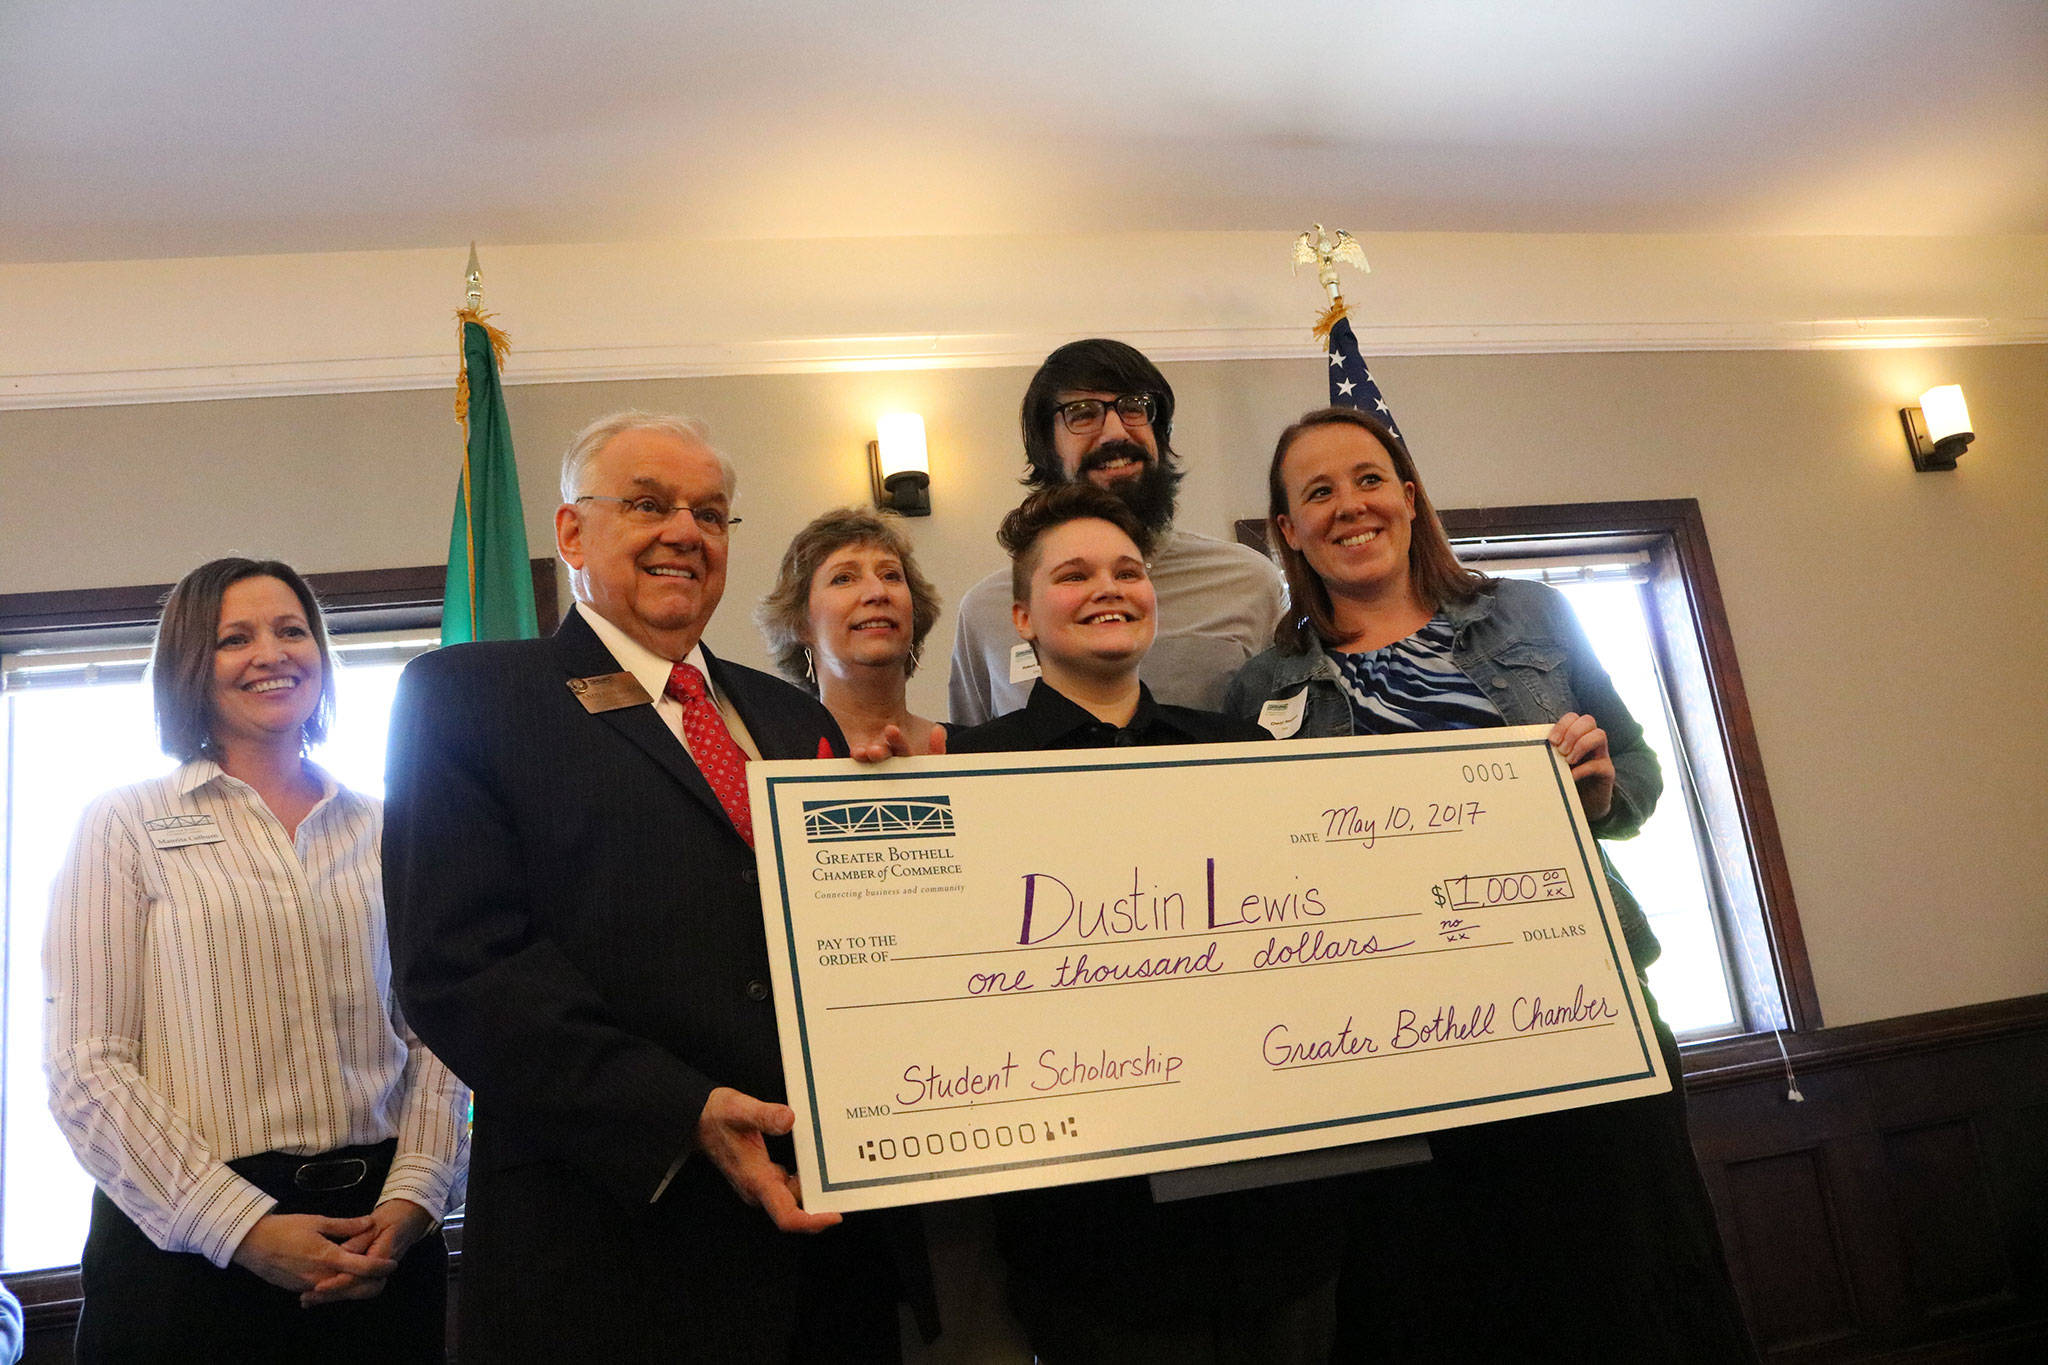 Secondary Academy for Success (SAS) student Dustin Lewis (center) is the recipient of this year’s Greater Bothell Chamber of Commerce scholarship. He poses with the big check alongside chamber representatives and SAS staff. SAMANTHA PAK, Bothell Reporter